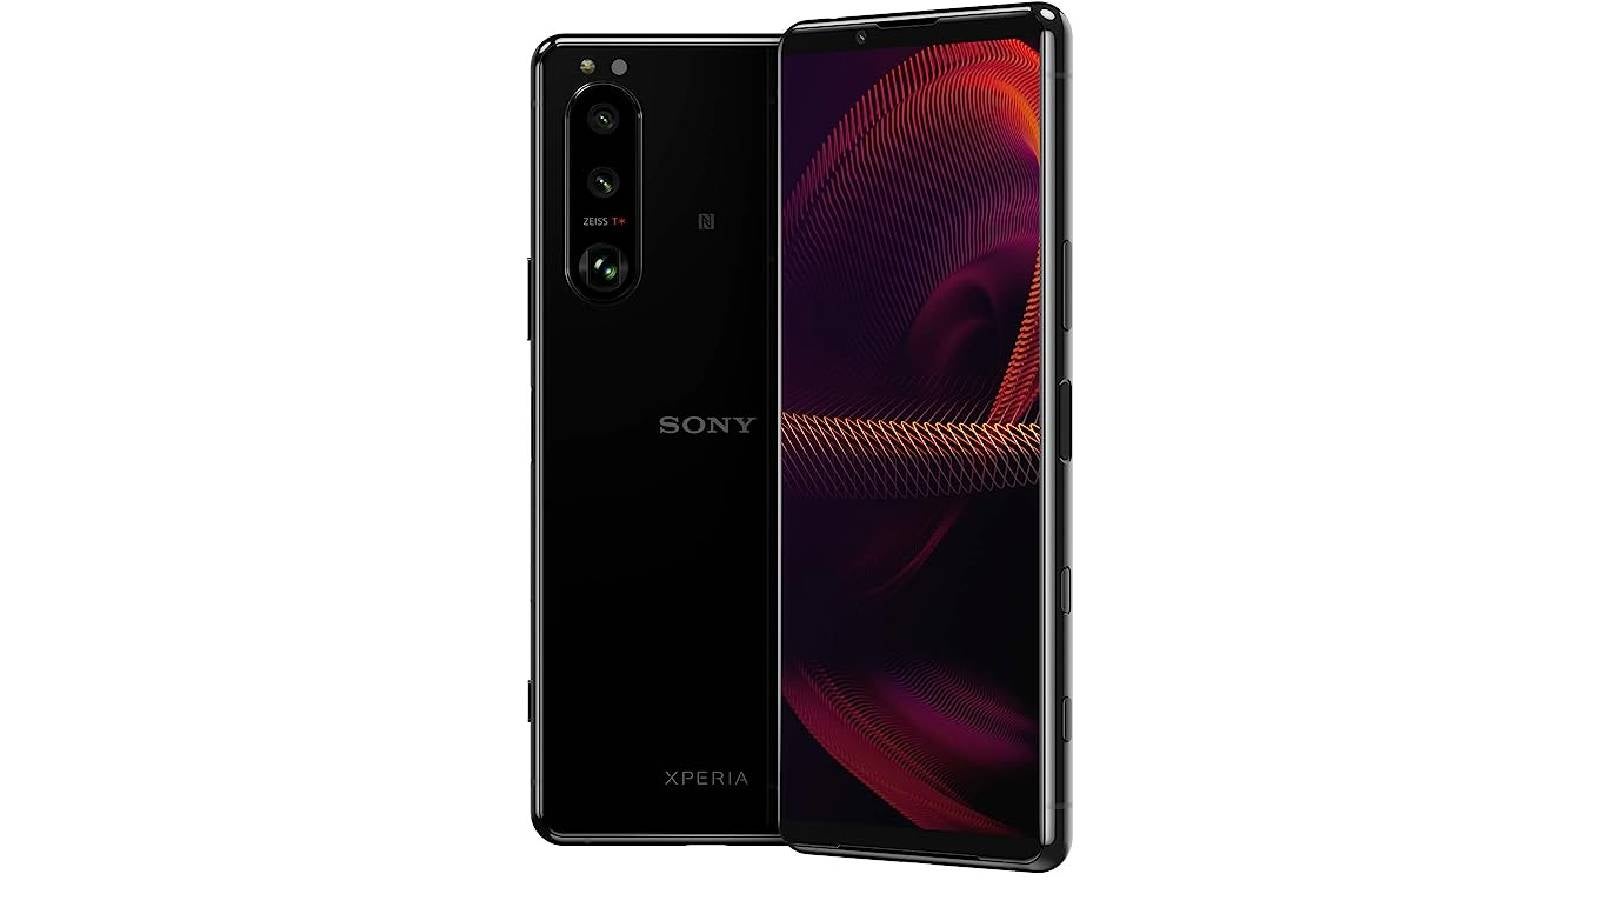 https://m-cdn.phonearena.com/images/article/149363-wide-two/Amazon-is-offering-an-outsized-discount-on-multimedia-junkies-dream-phone-Sony-Xperia-5-III.jpg